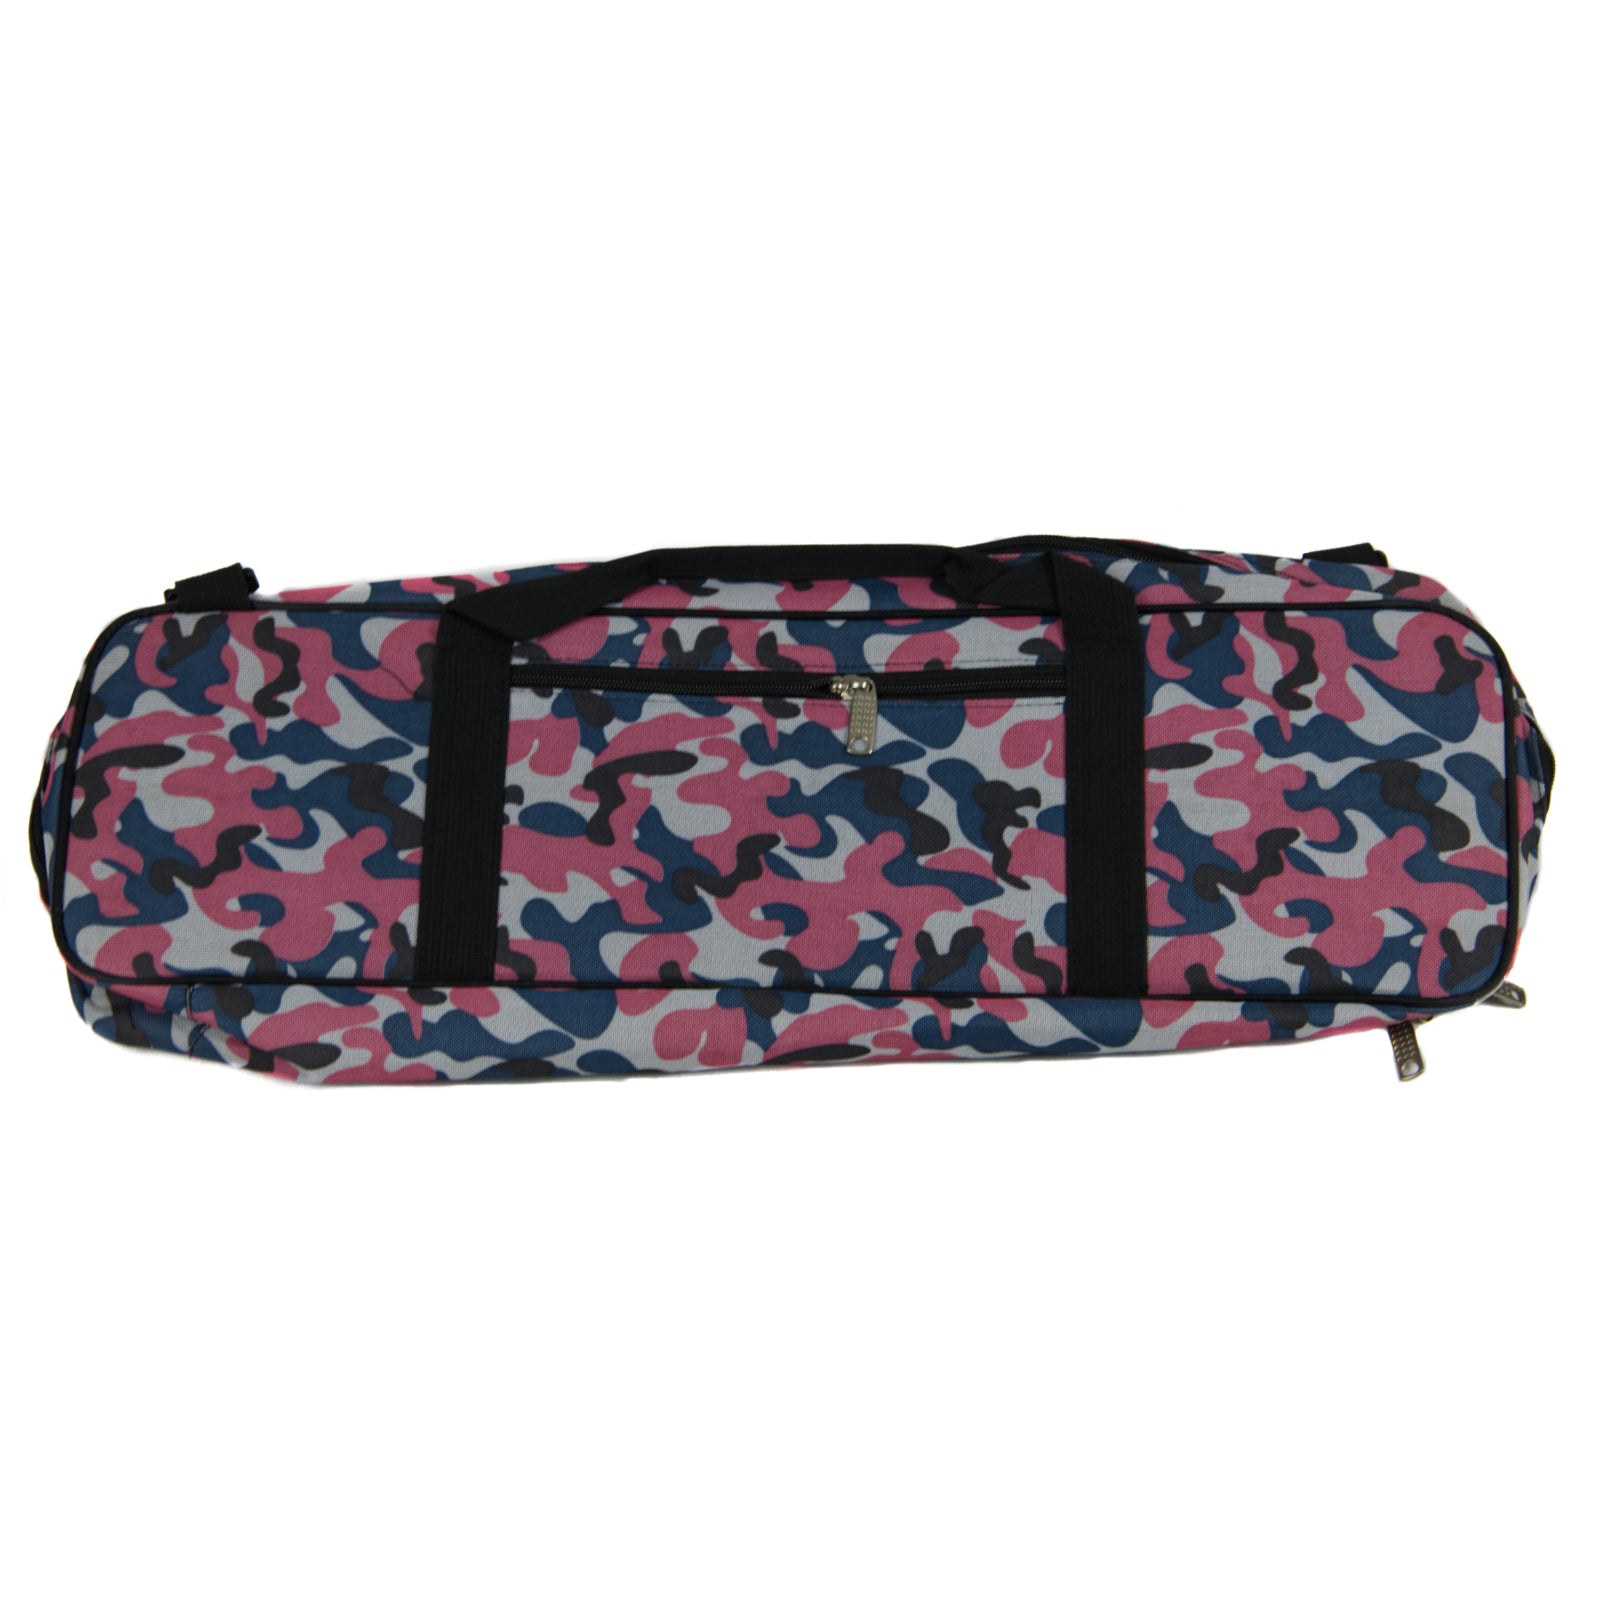 Deluxe Carry All Chess Bag - Pink Camo